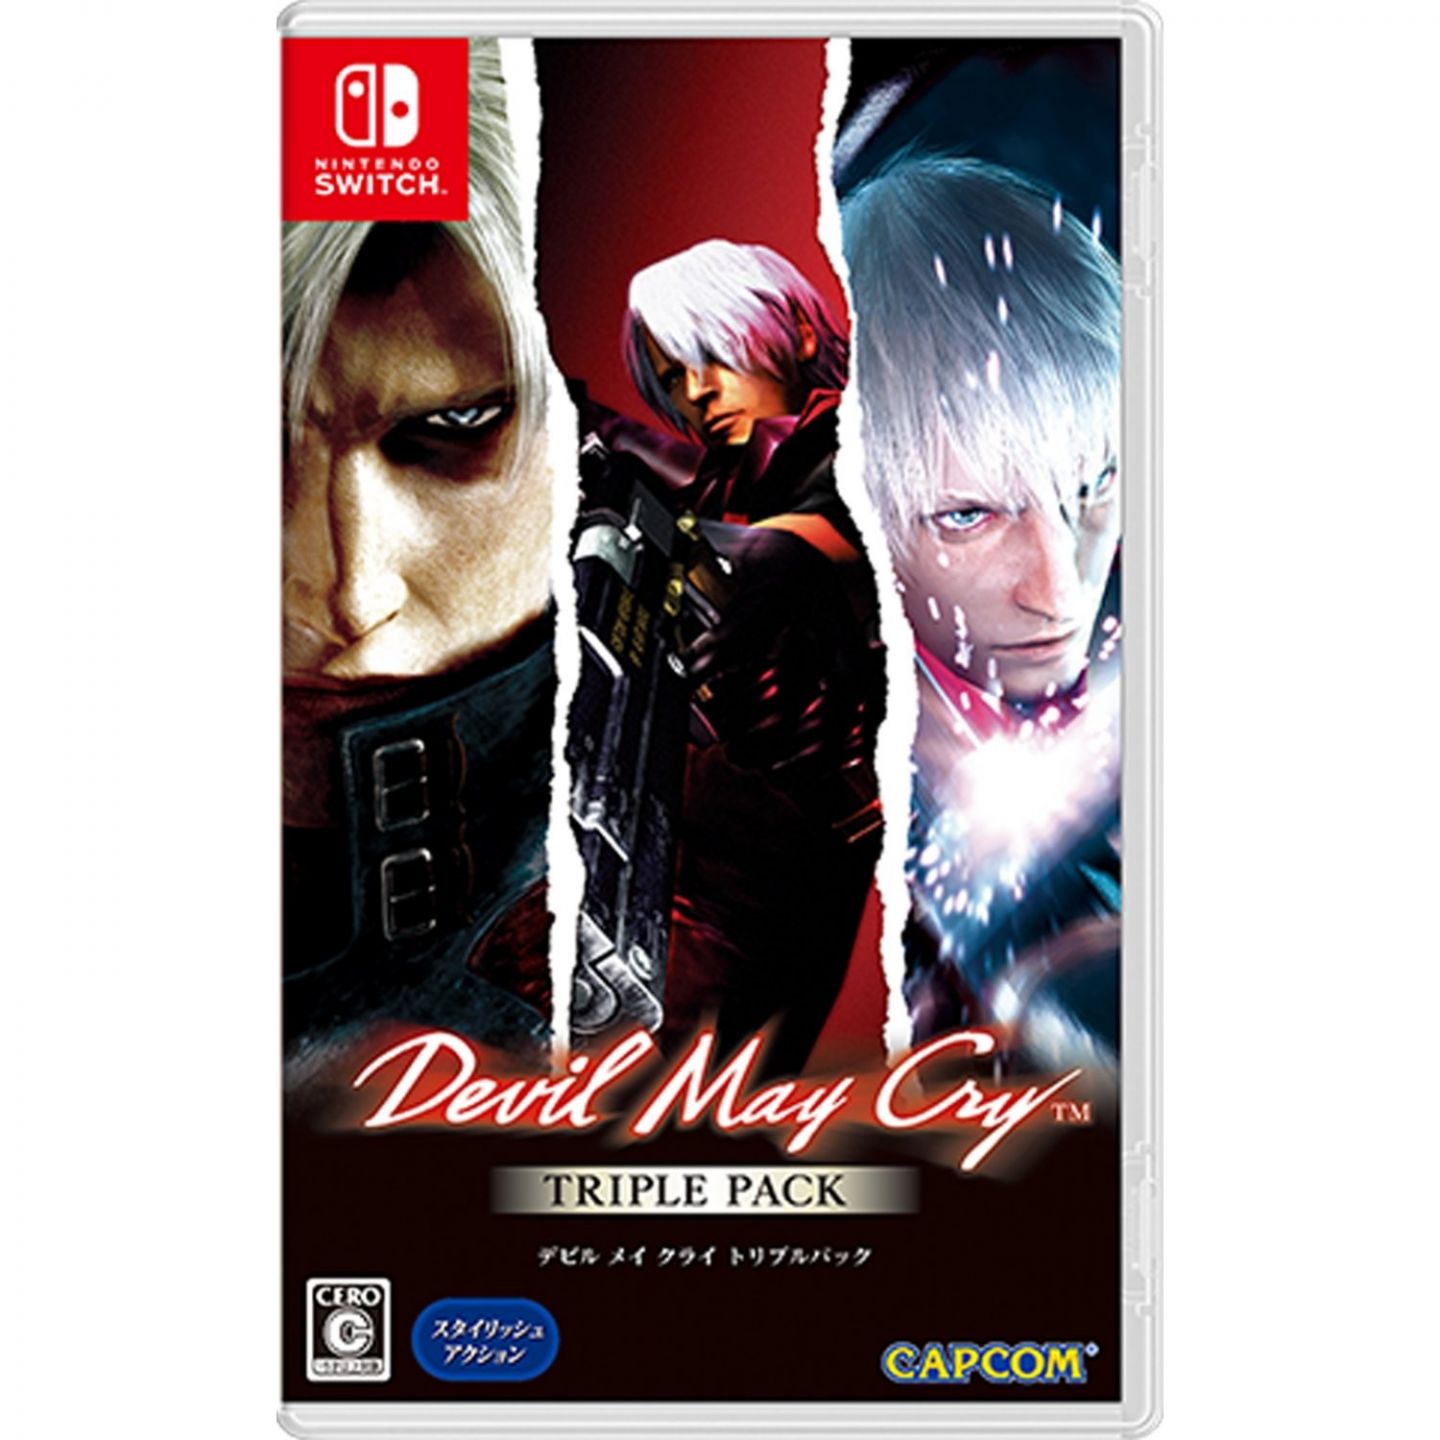 Devil May Cry 5 Special Edition Sony PS5 Video Games From Japan Tracking#  NEW